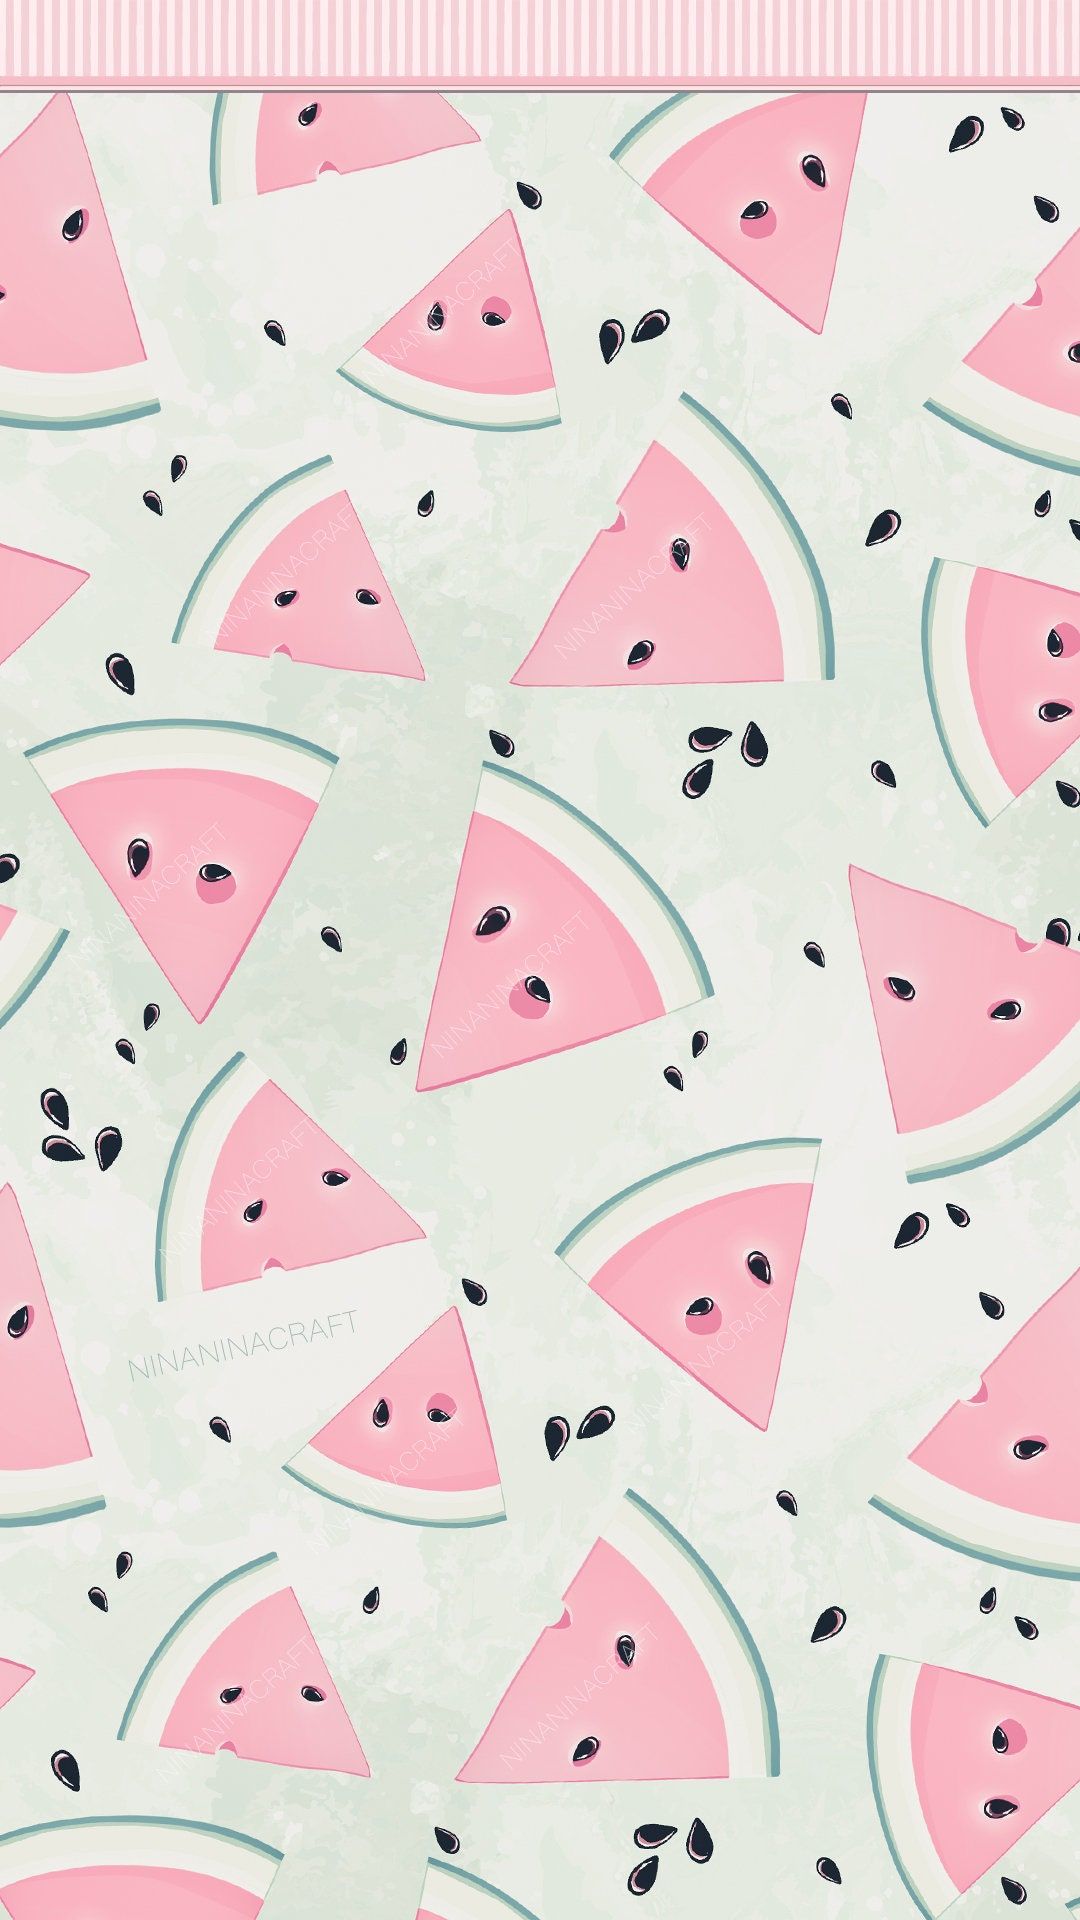 A watermelon patterned paper with pink and white - Watermelon